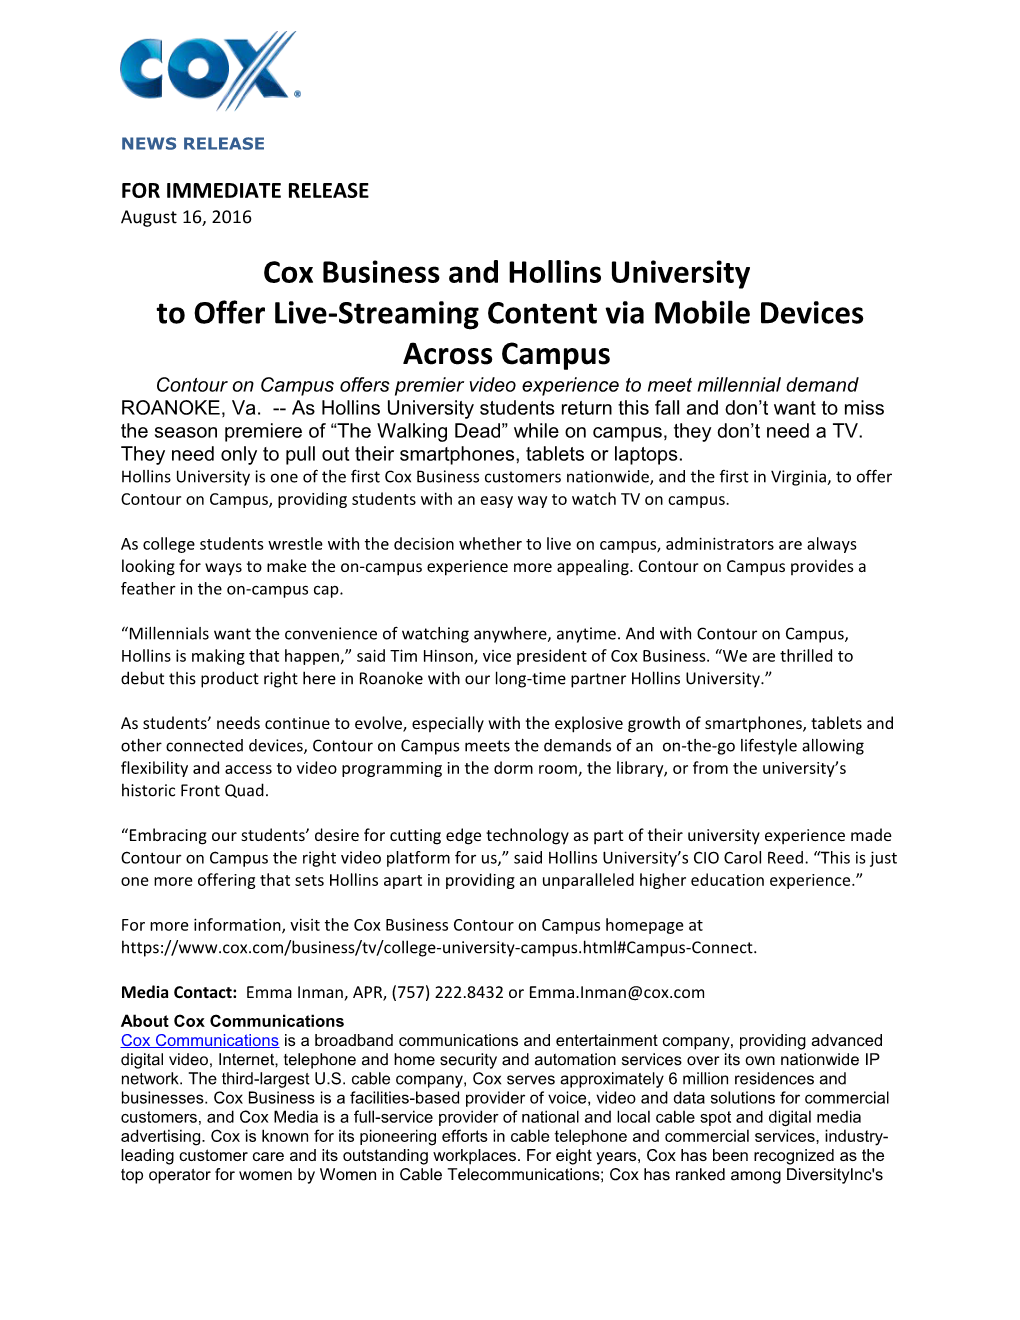 To Offer Live-Streaming Content Via Mobile Devices Across Campus